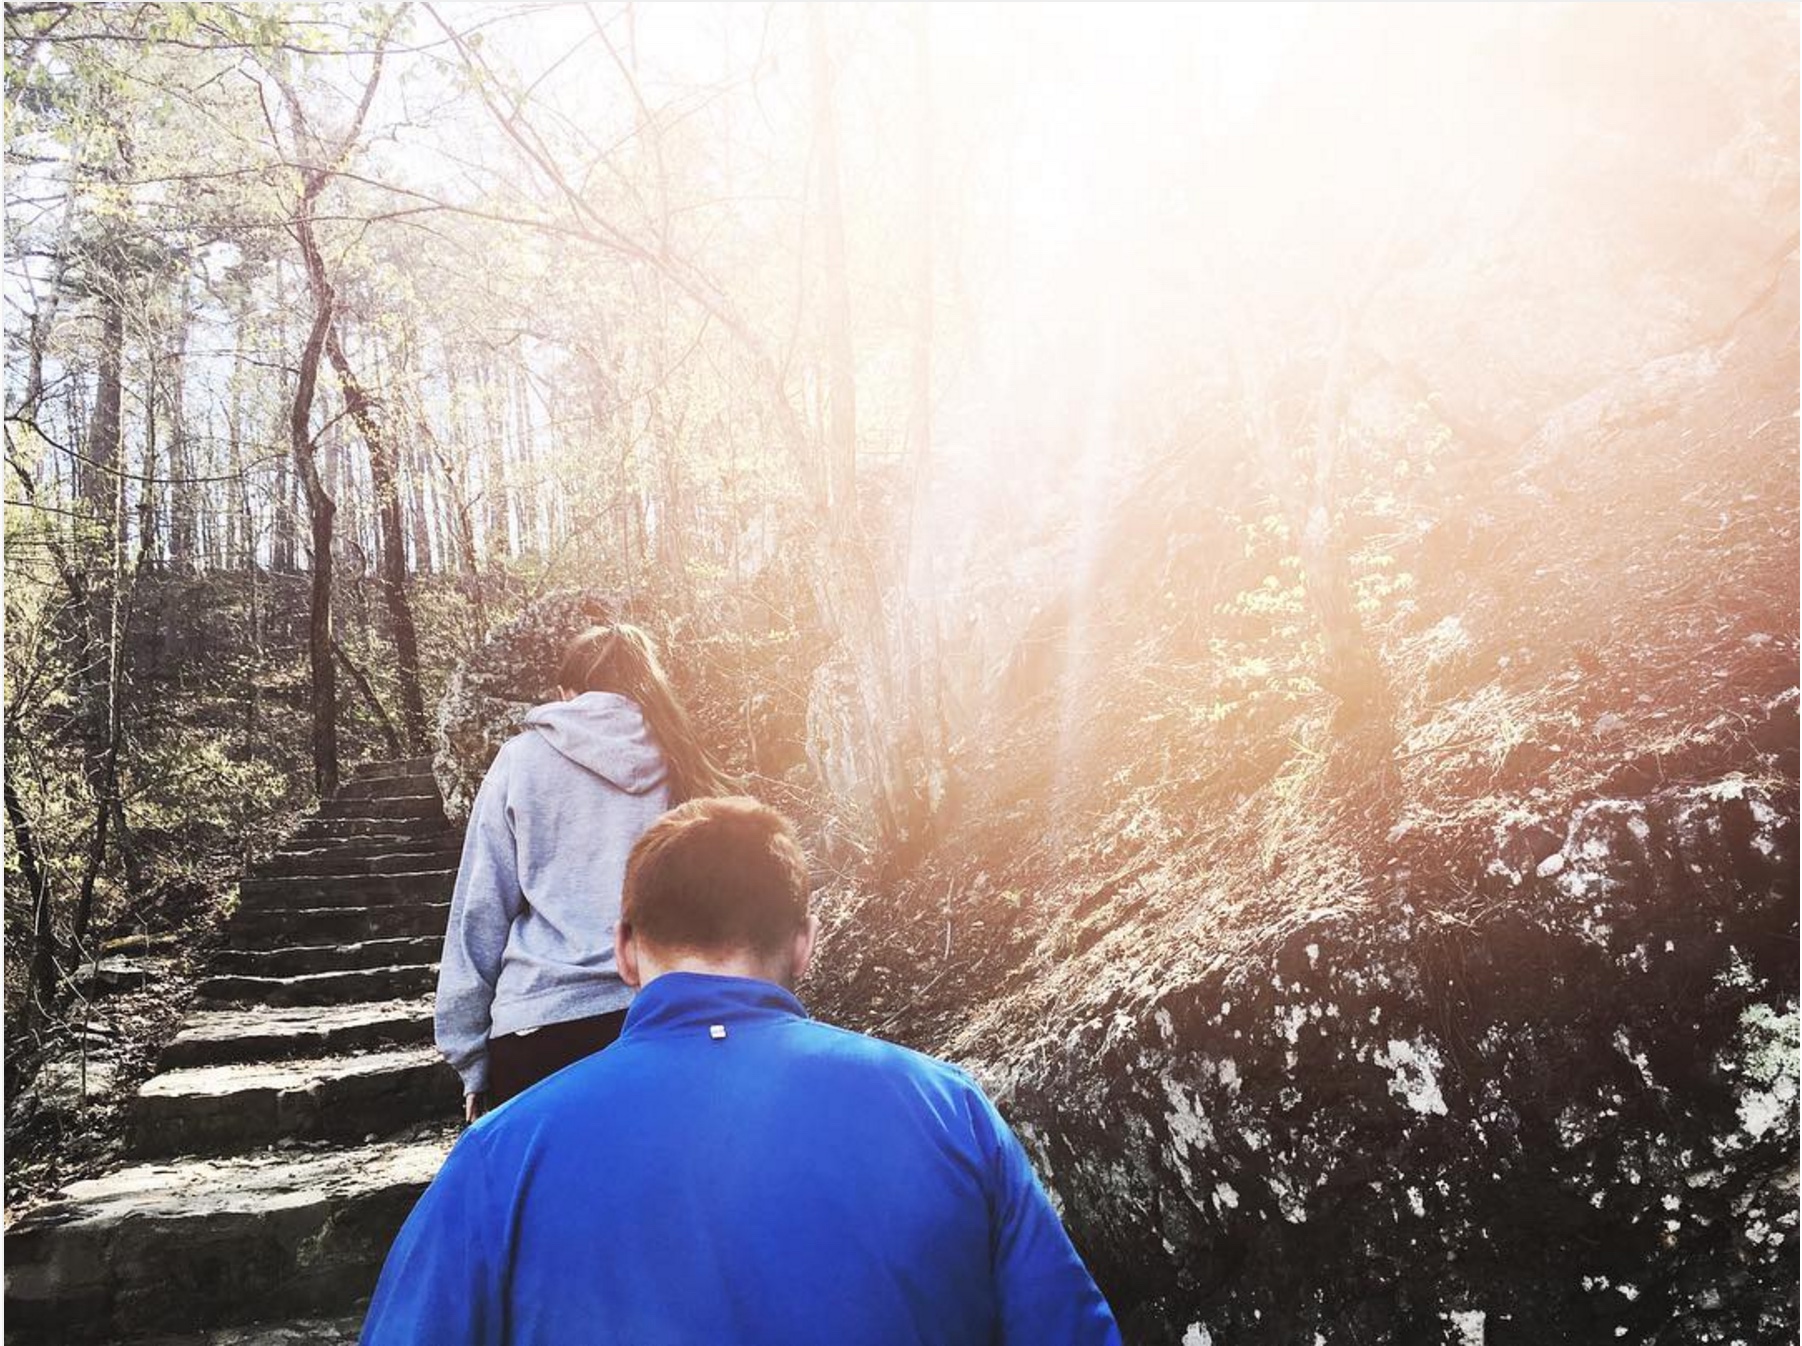 Man and Woman hiking up steps on the side of a hill with sunlight beaming down.